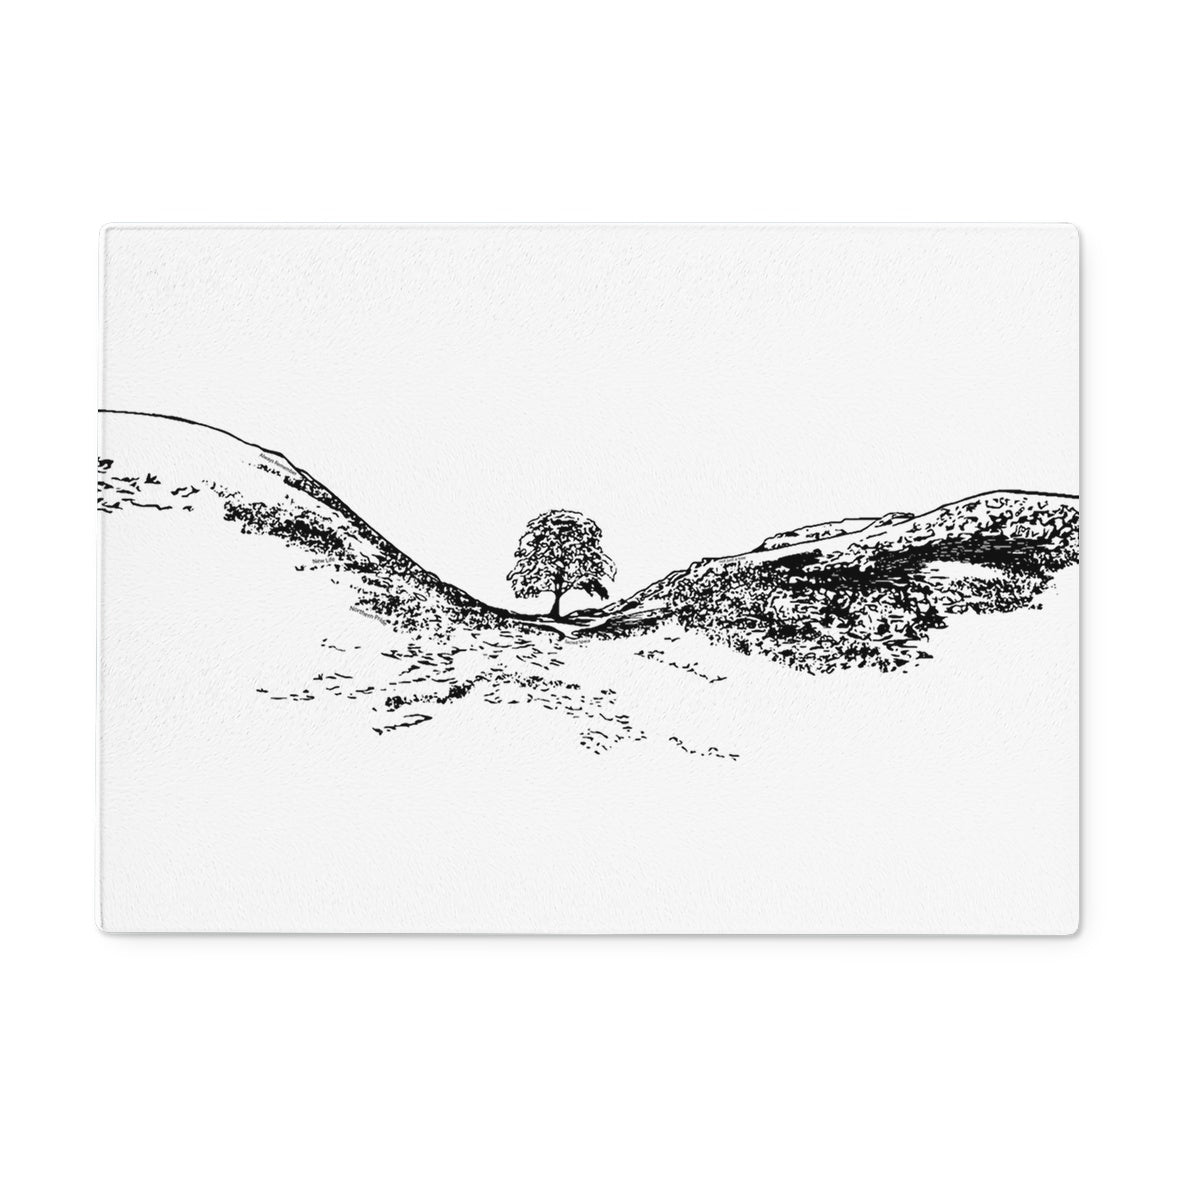 Sycamore Gap themed coaster featuring a Sycamore Gap design by Powder Butterfly